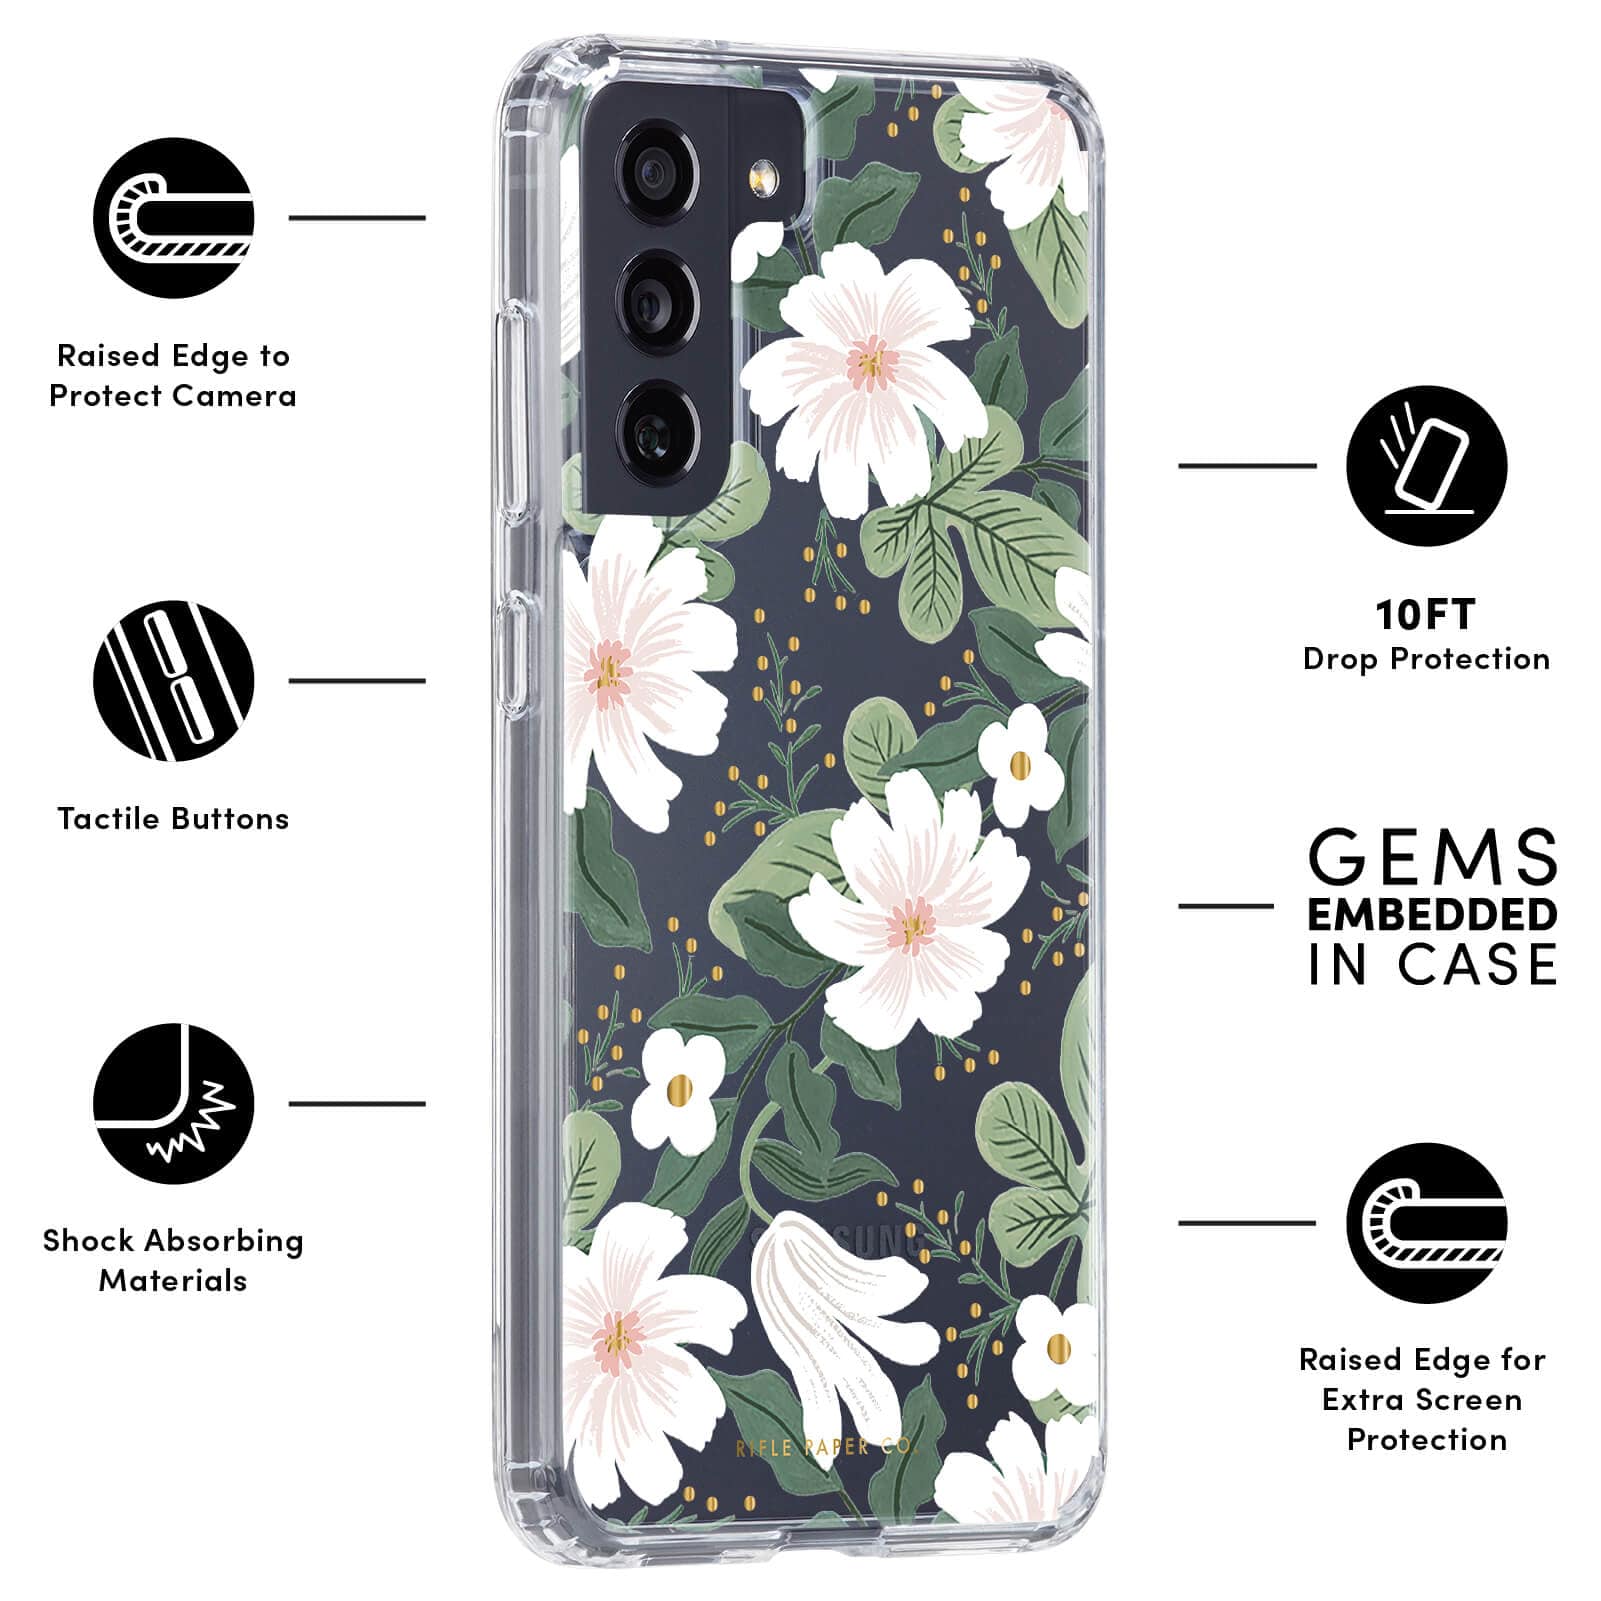 FEATURES: RAISED EDGE TO PROTECT CAMERA, TACTILE BUTTONS, SHOCK ABSORBING MATERIALS, 10FT DROP PROTECTION, GEMS EMBEDDED IN CASE, RAISED EDGE FOR EXTRA SCREEN PROTECTION. COLOR::WILLOW